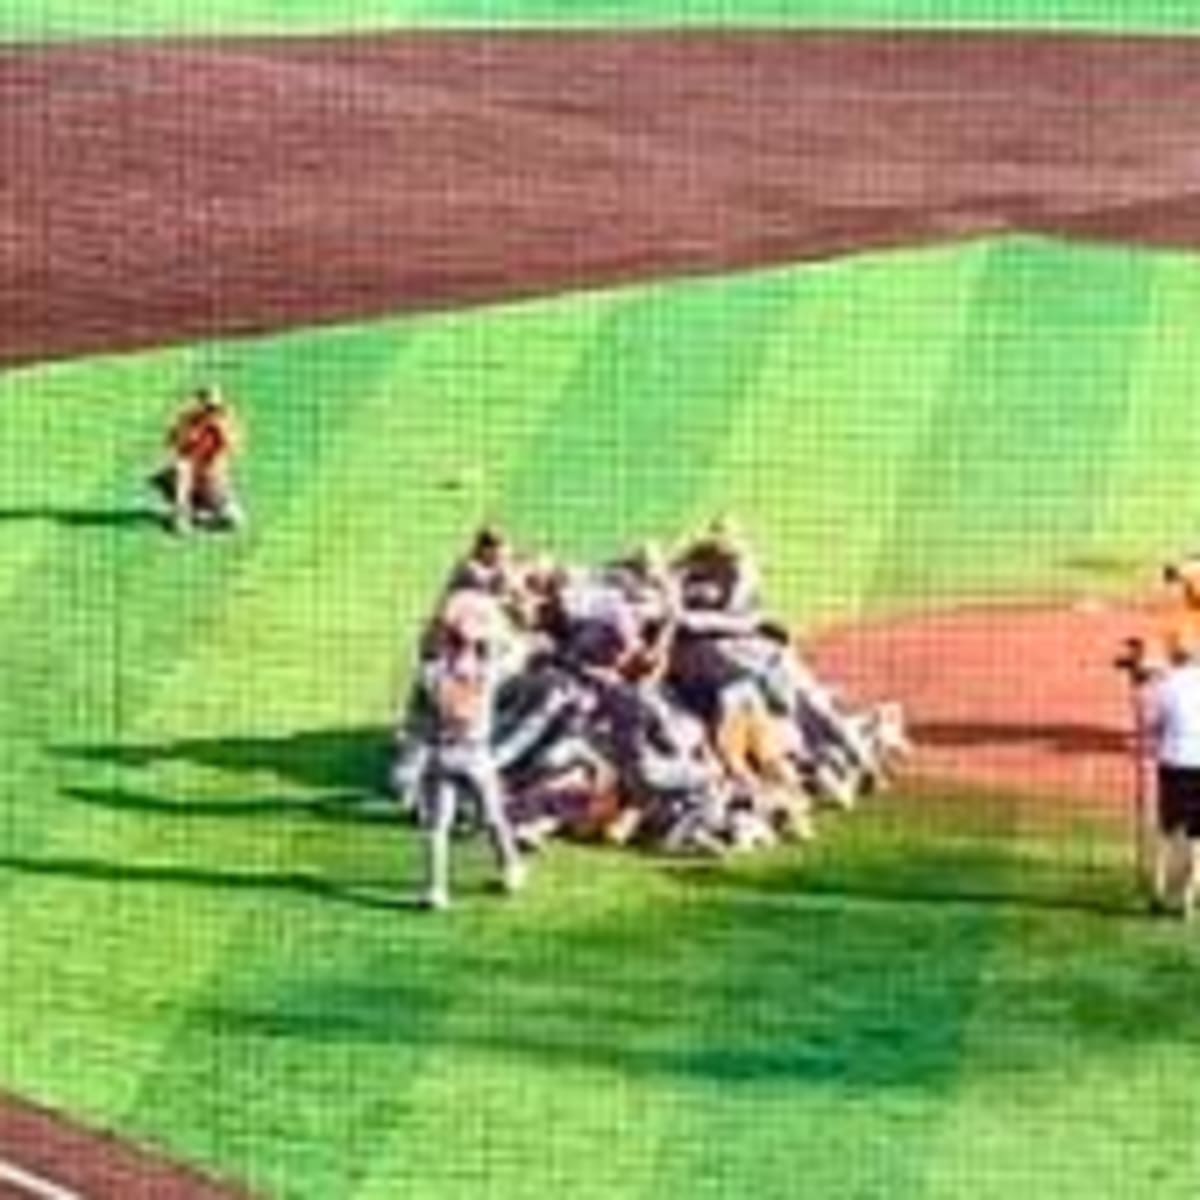 Tennessee Heads to Sixth College World Series in Program History